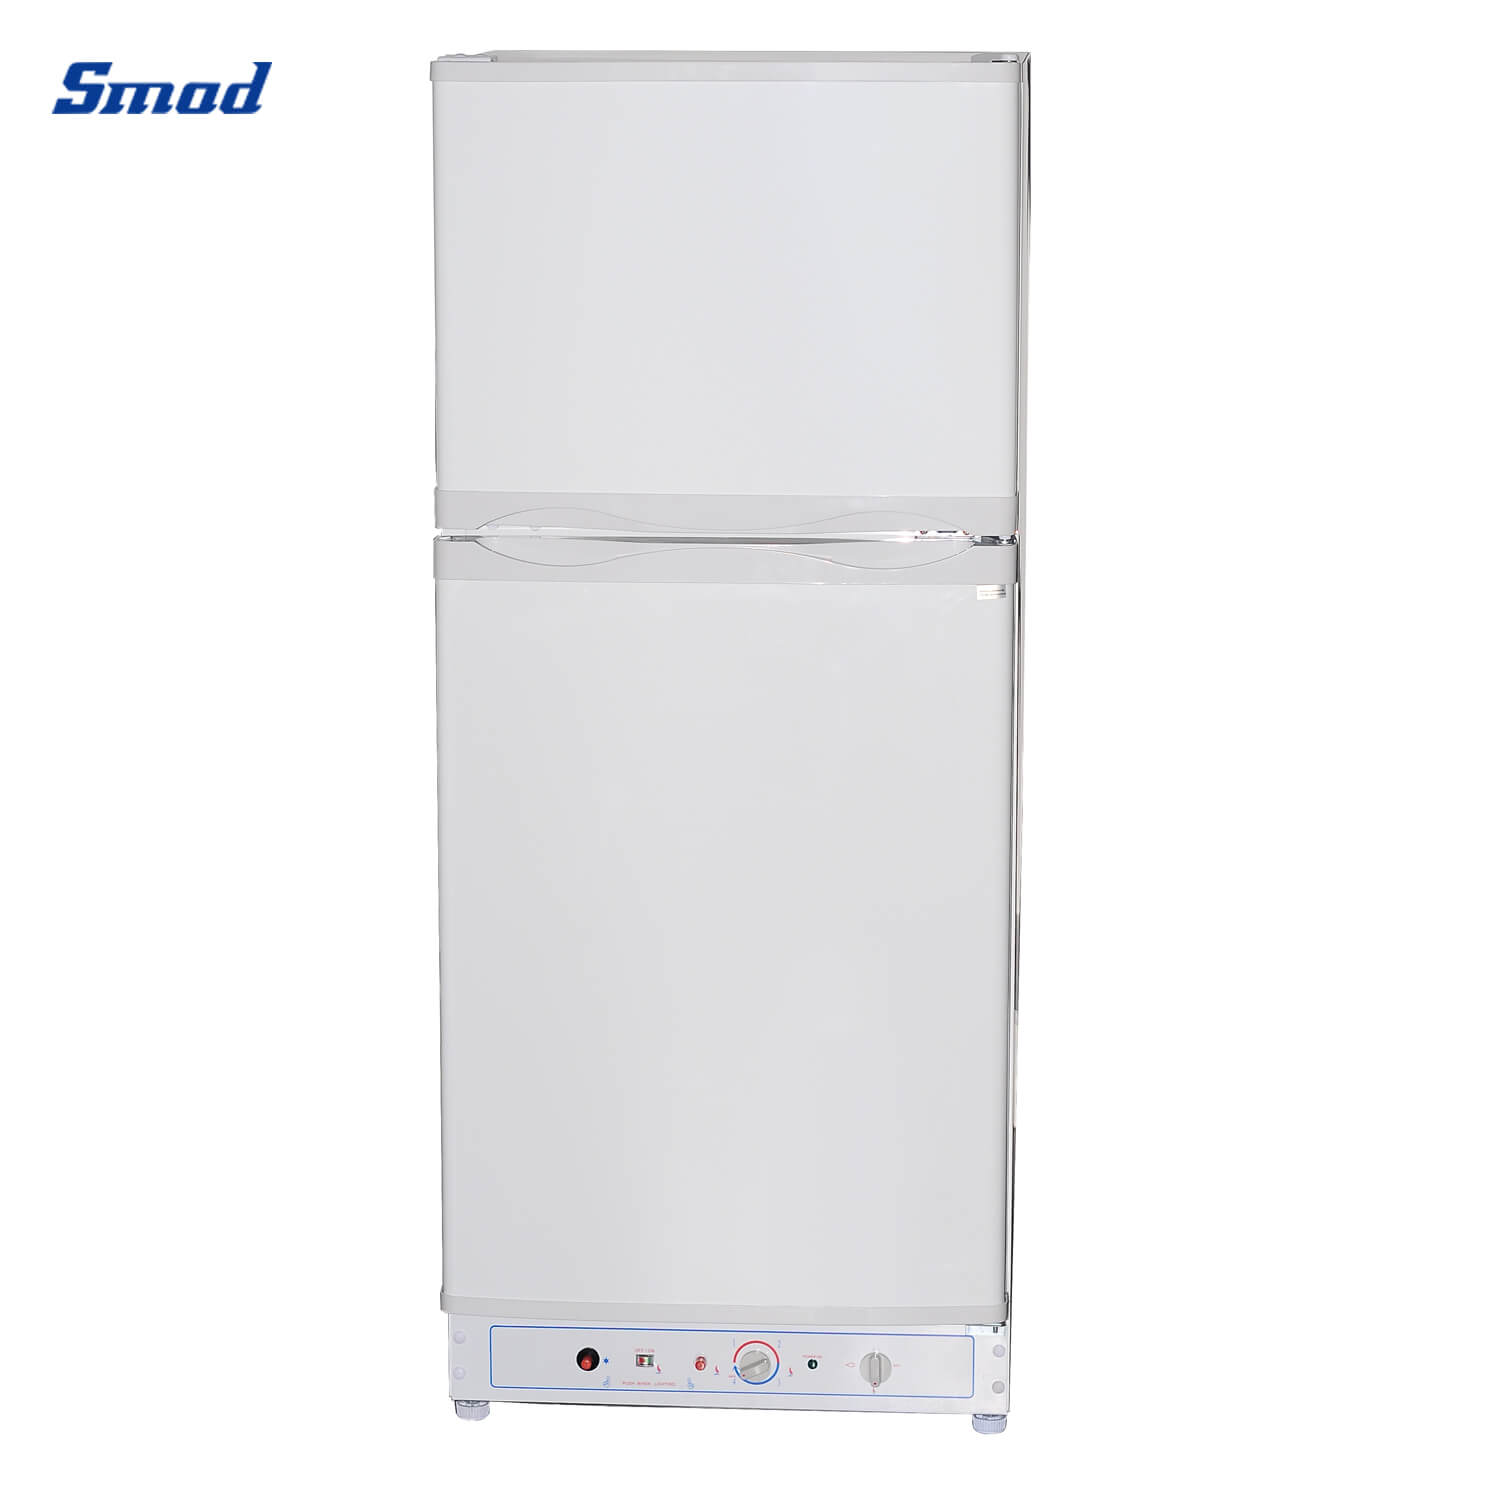 
Smad 9.4 Cu. Ft. Double Door Gas/Electric Fridge with no noise